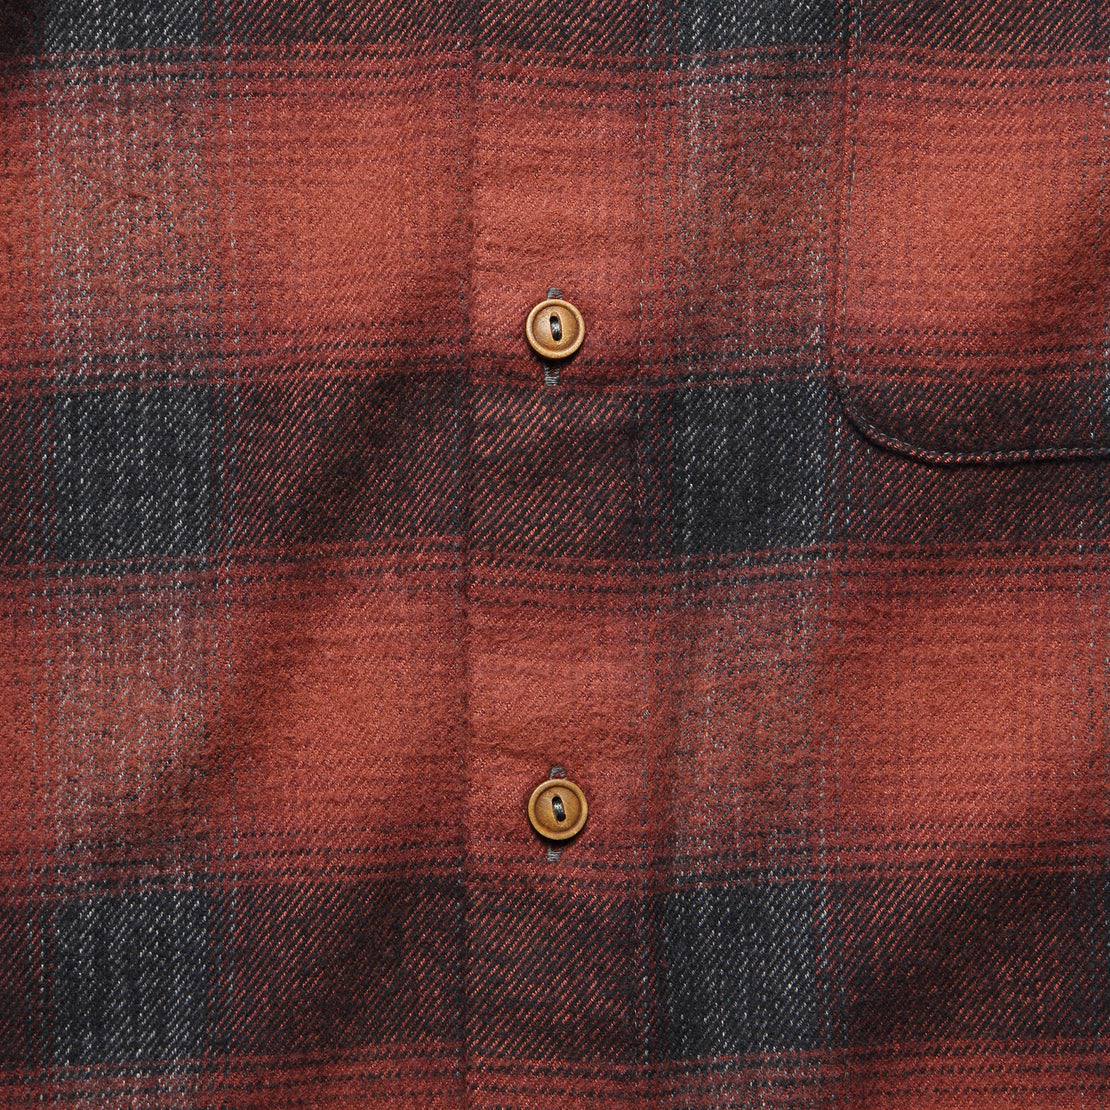 Vintage Plaid Double Gauze Shirt - Red Check - KATO - STAG Provisions - Tops - L/S Woven - Plaid